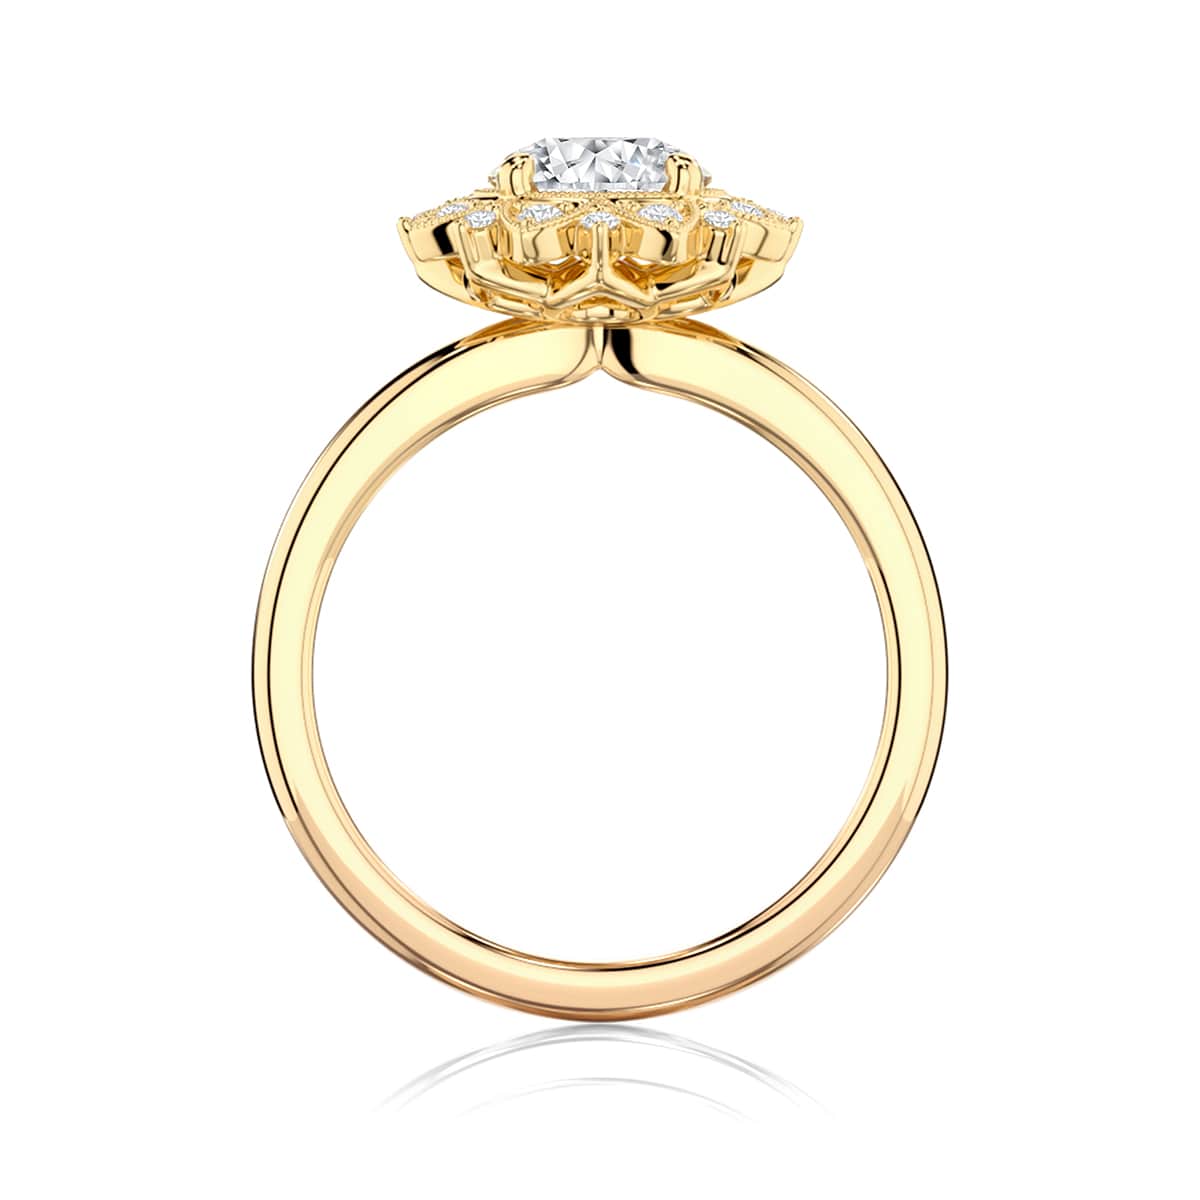 Marisol Round Diamond Vintage Engagement Ring in Yellow Gold